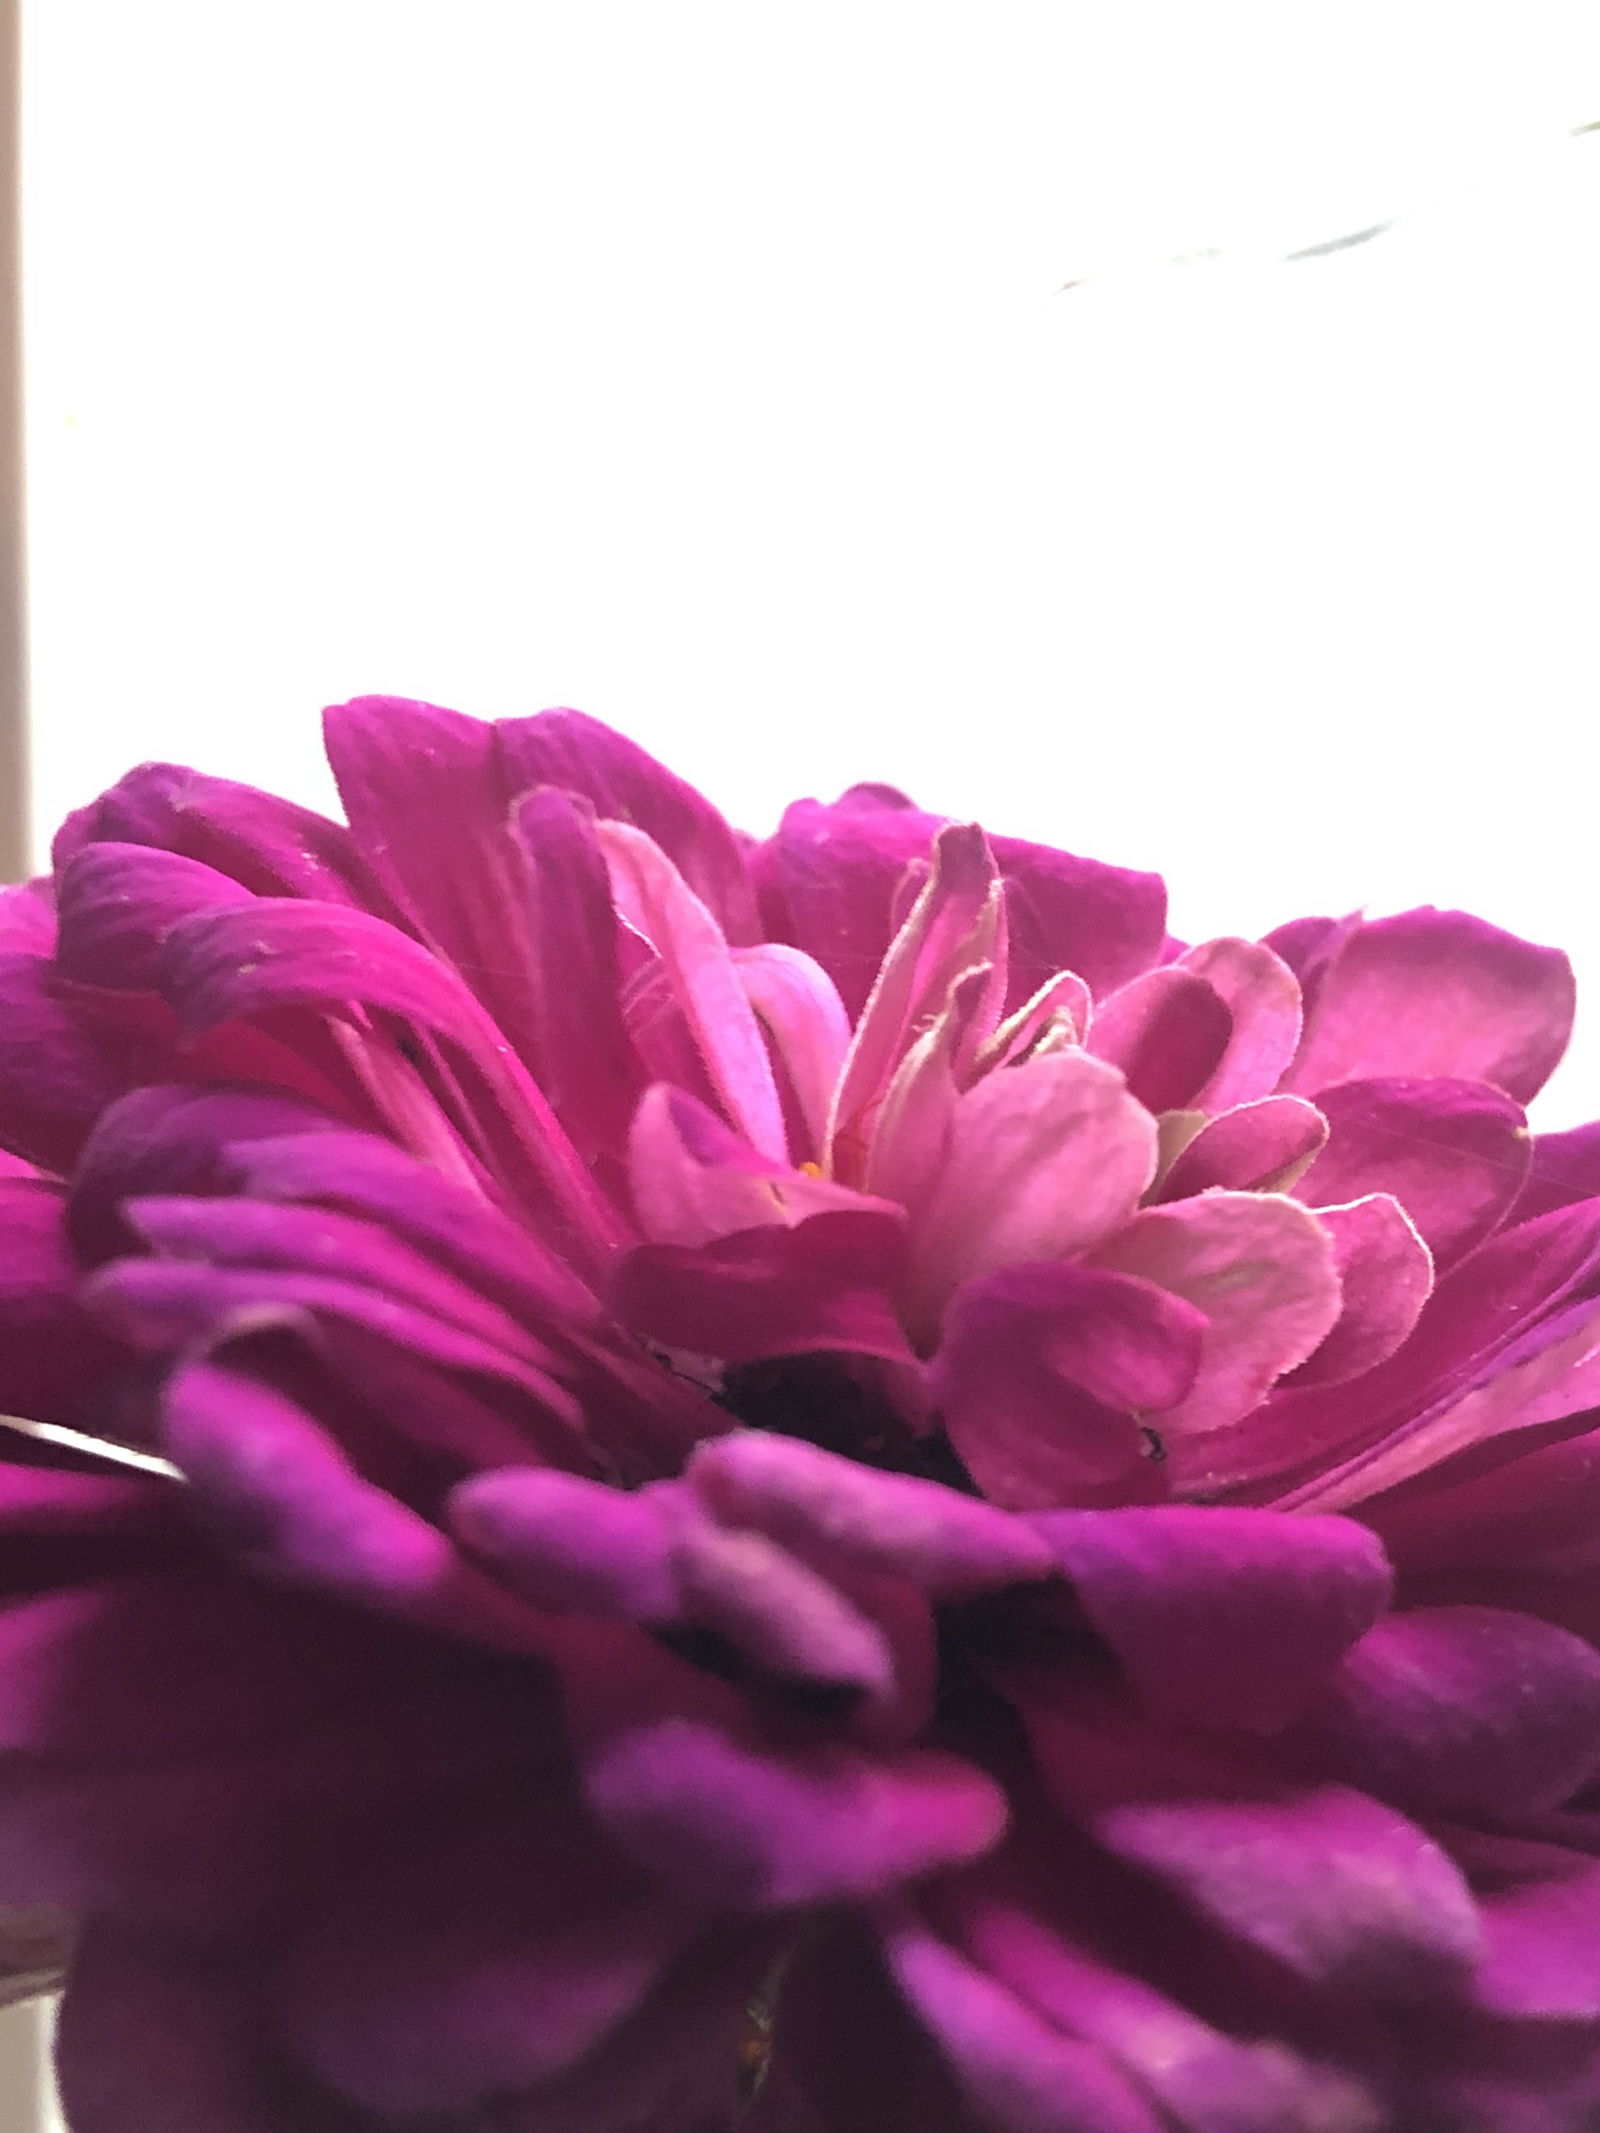 Photo by PolyAnnieStudios with the username @PolyAnnieStudios, who is a star user,  October 12, 2019 at 2:20 PM. The post is about the topic Flowers and the text says 'My zinnias were late to bloom this year and are abundant right now! Sometimes its nice to stop and admire their beauty💕✨ 
https://www.instagram.com/polyannie01/'